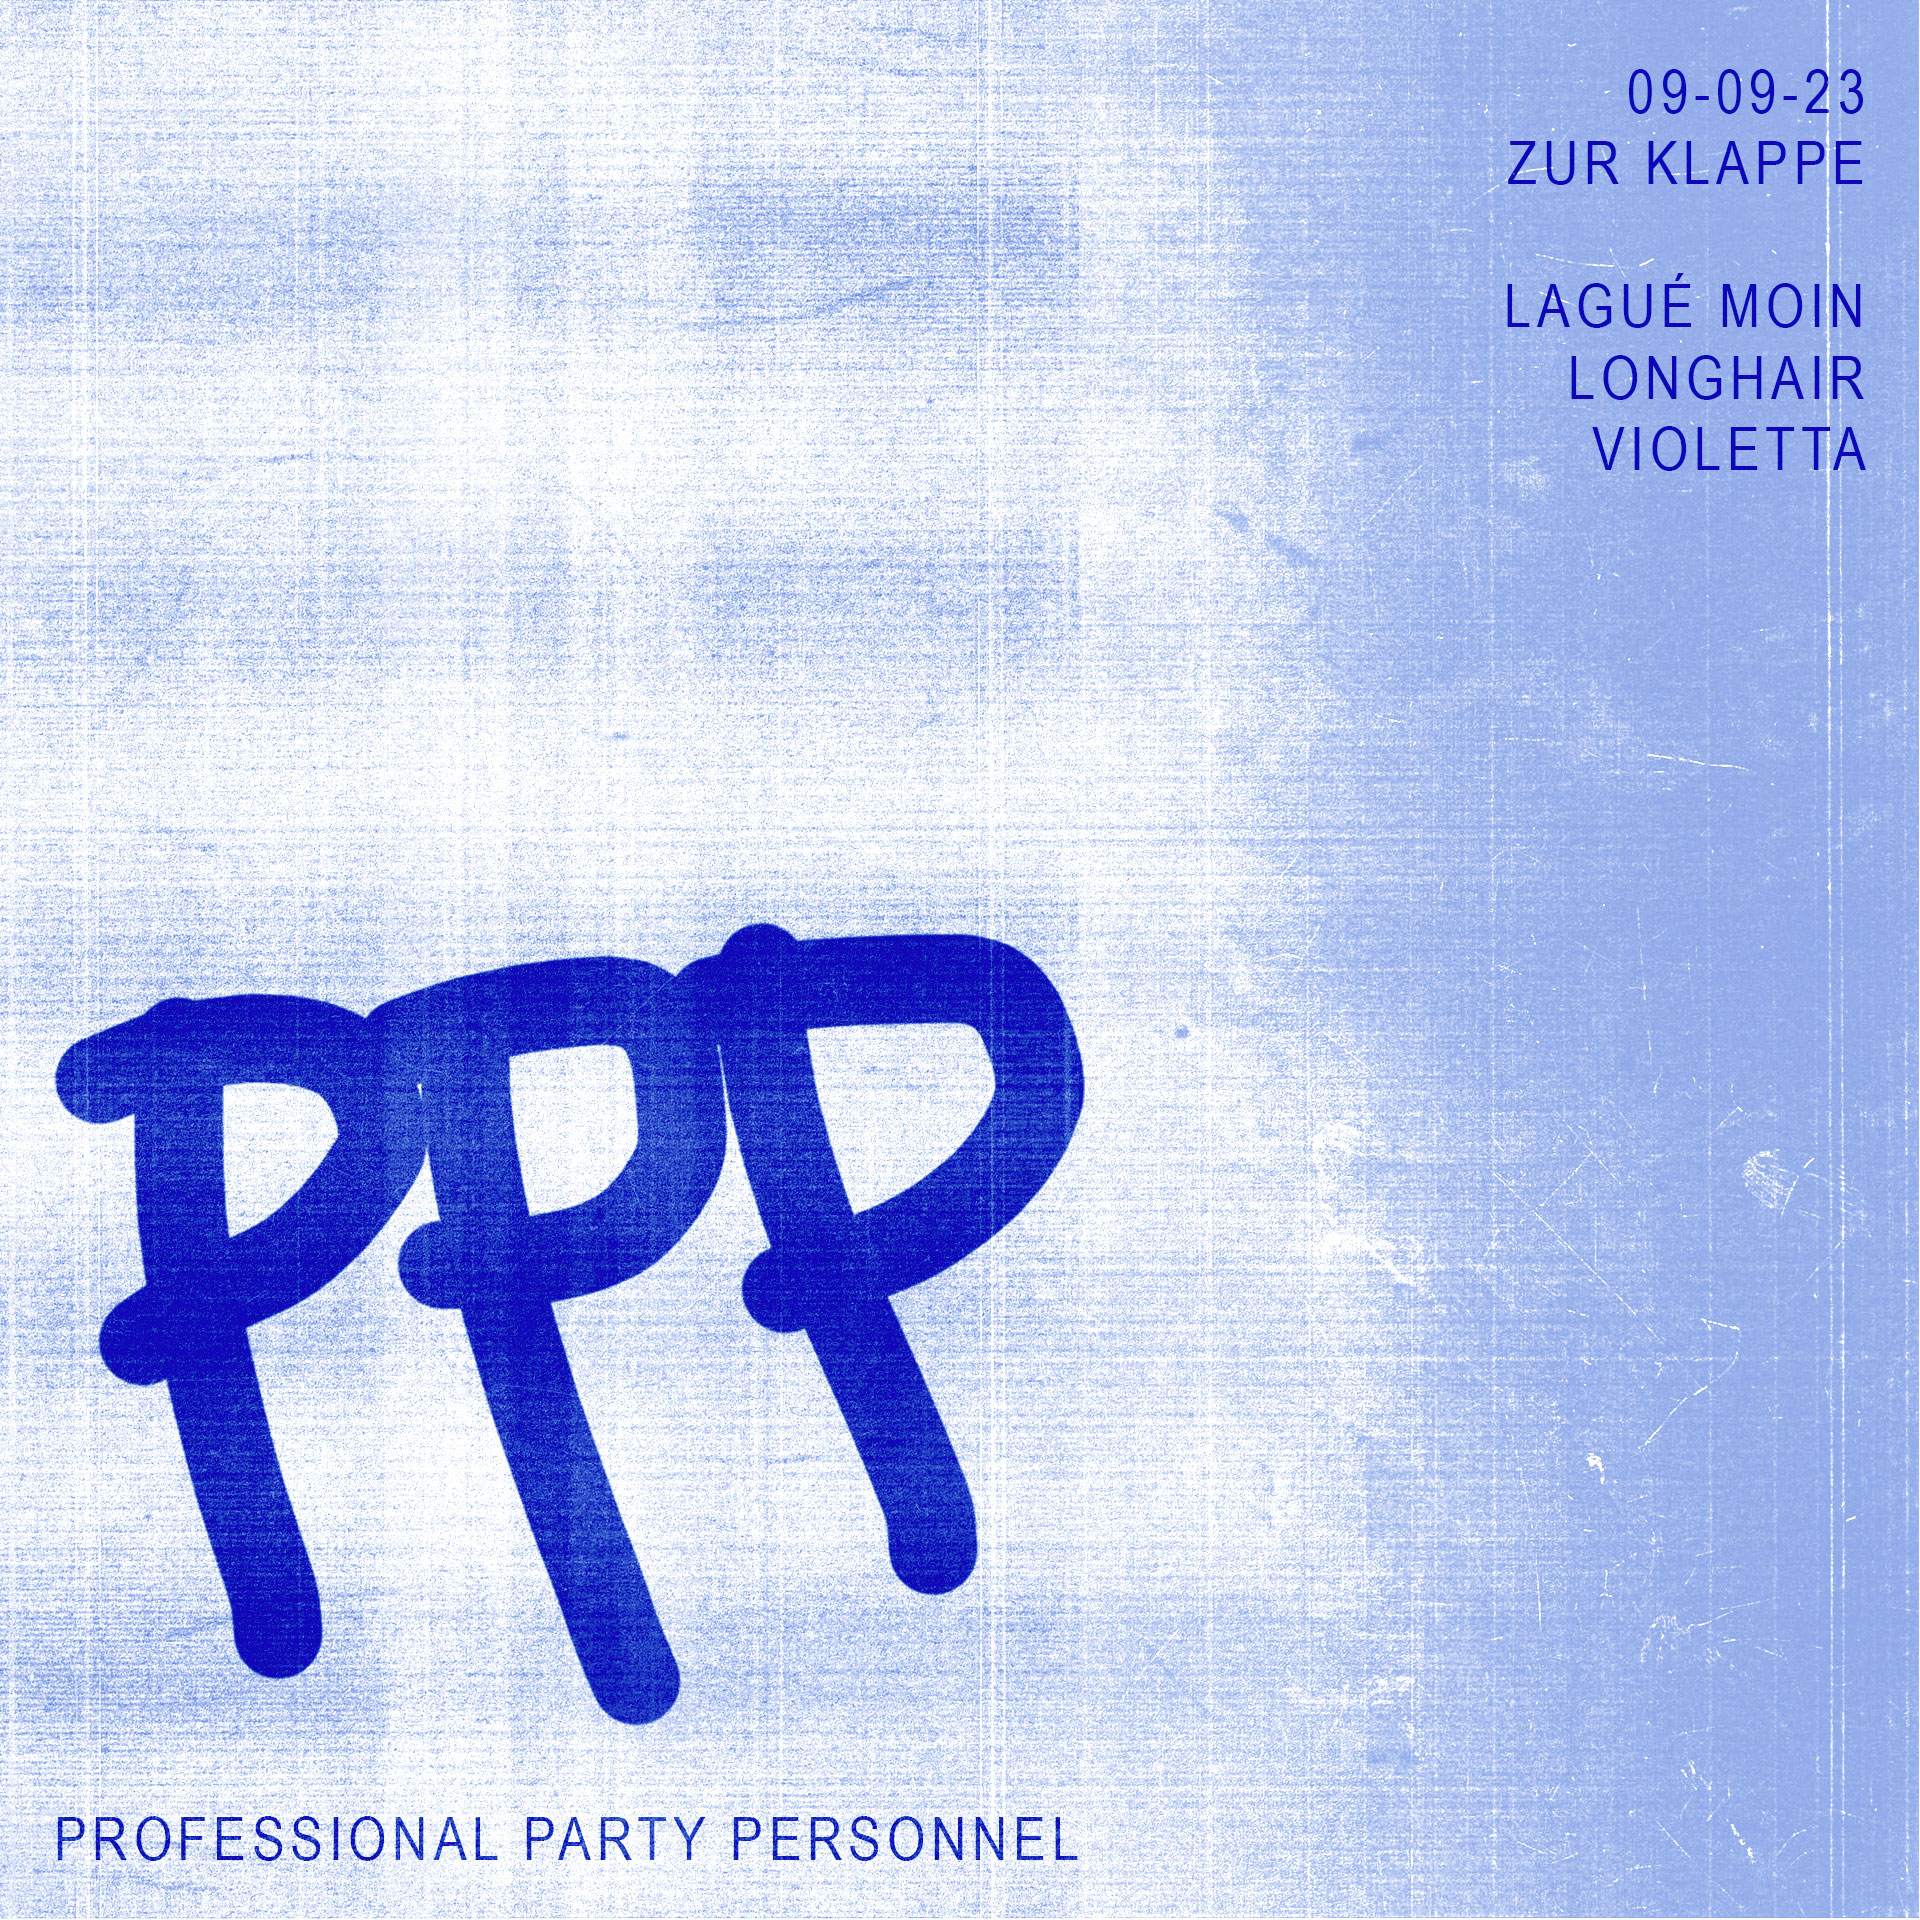 PPP- Professional Party Personnel - フライヤー表